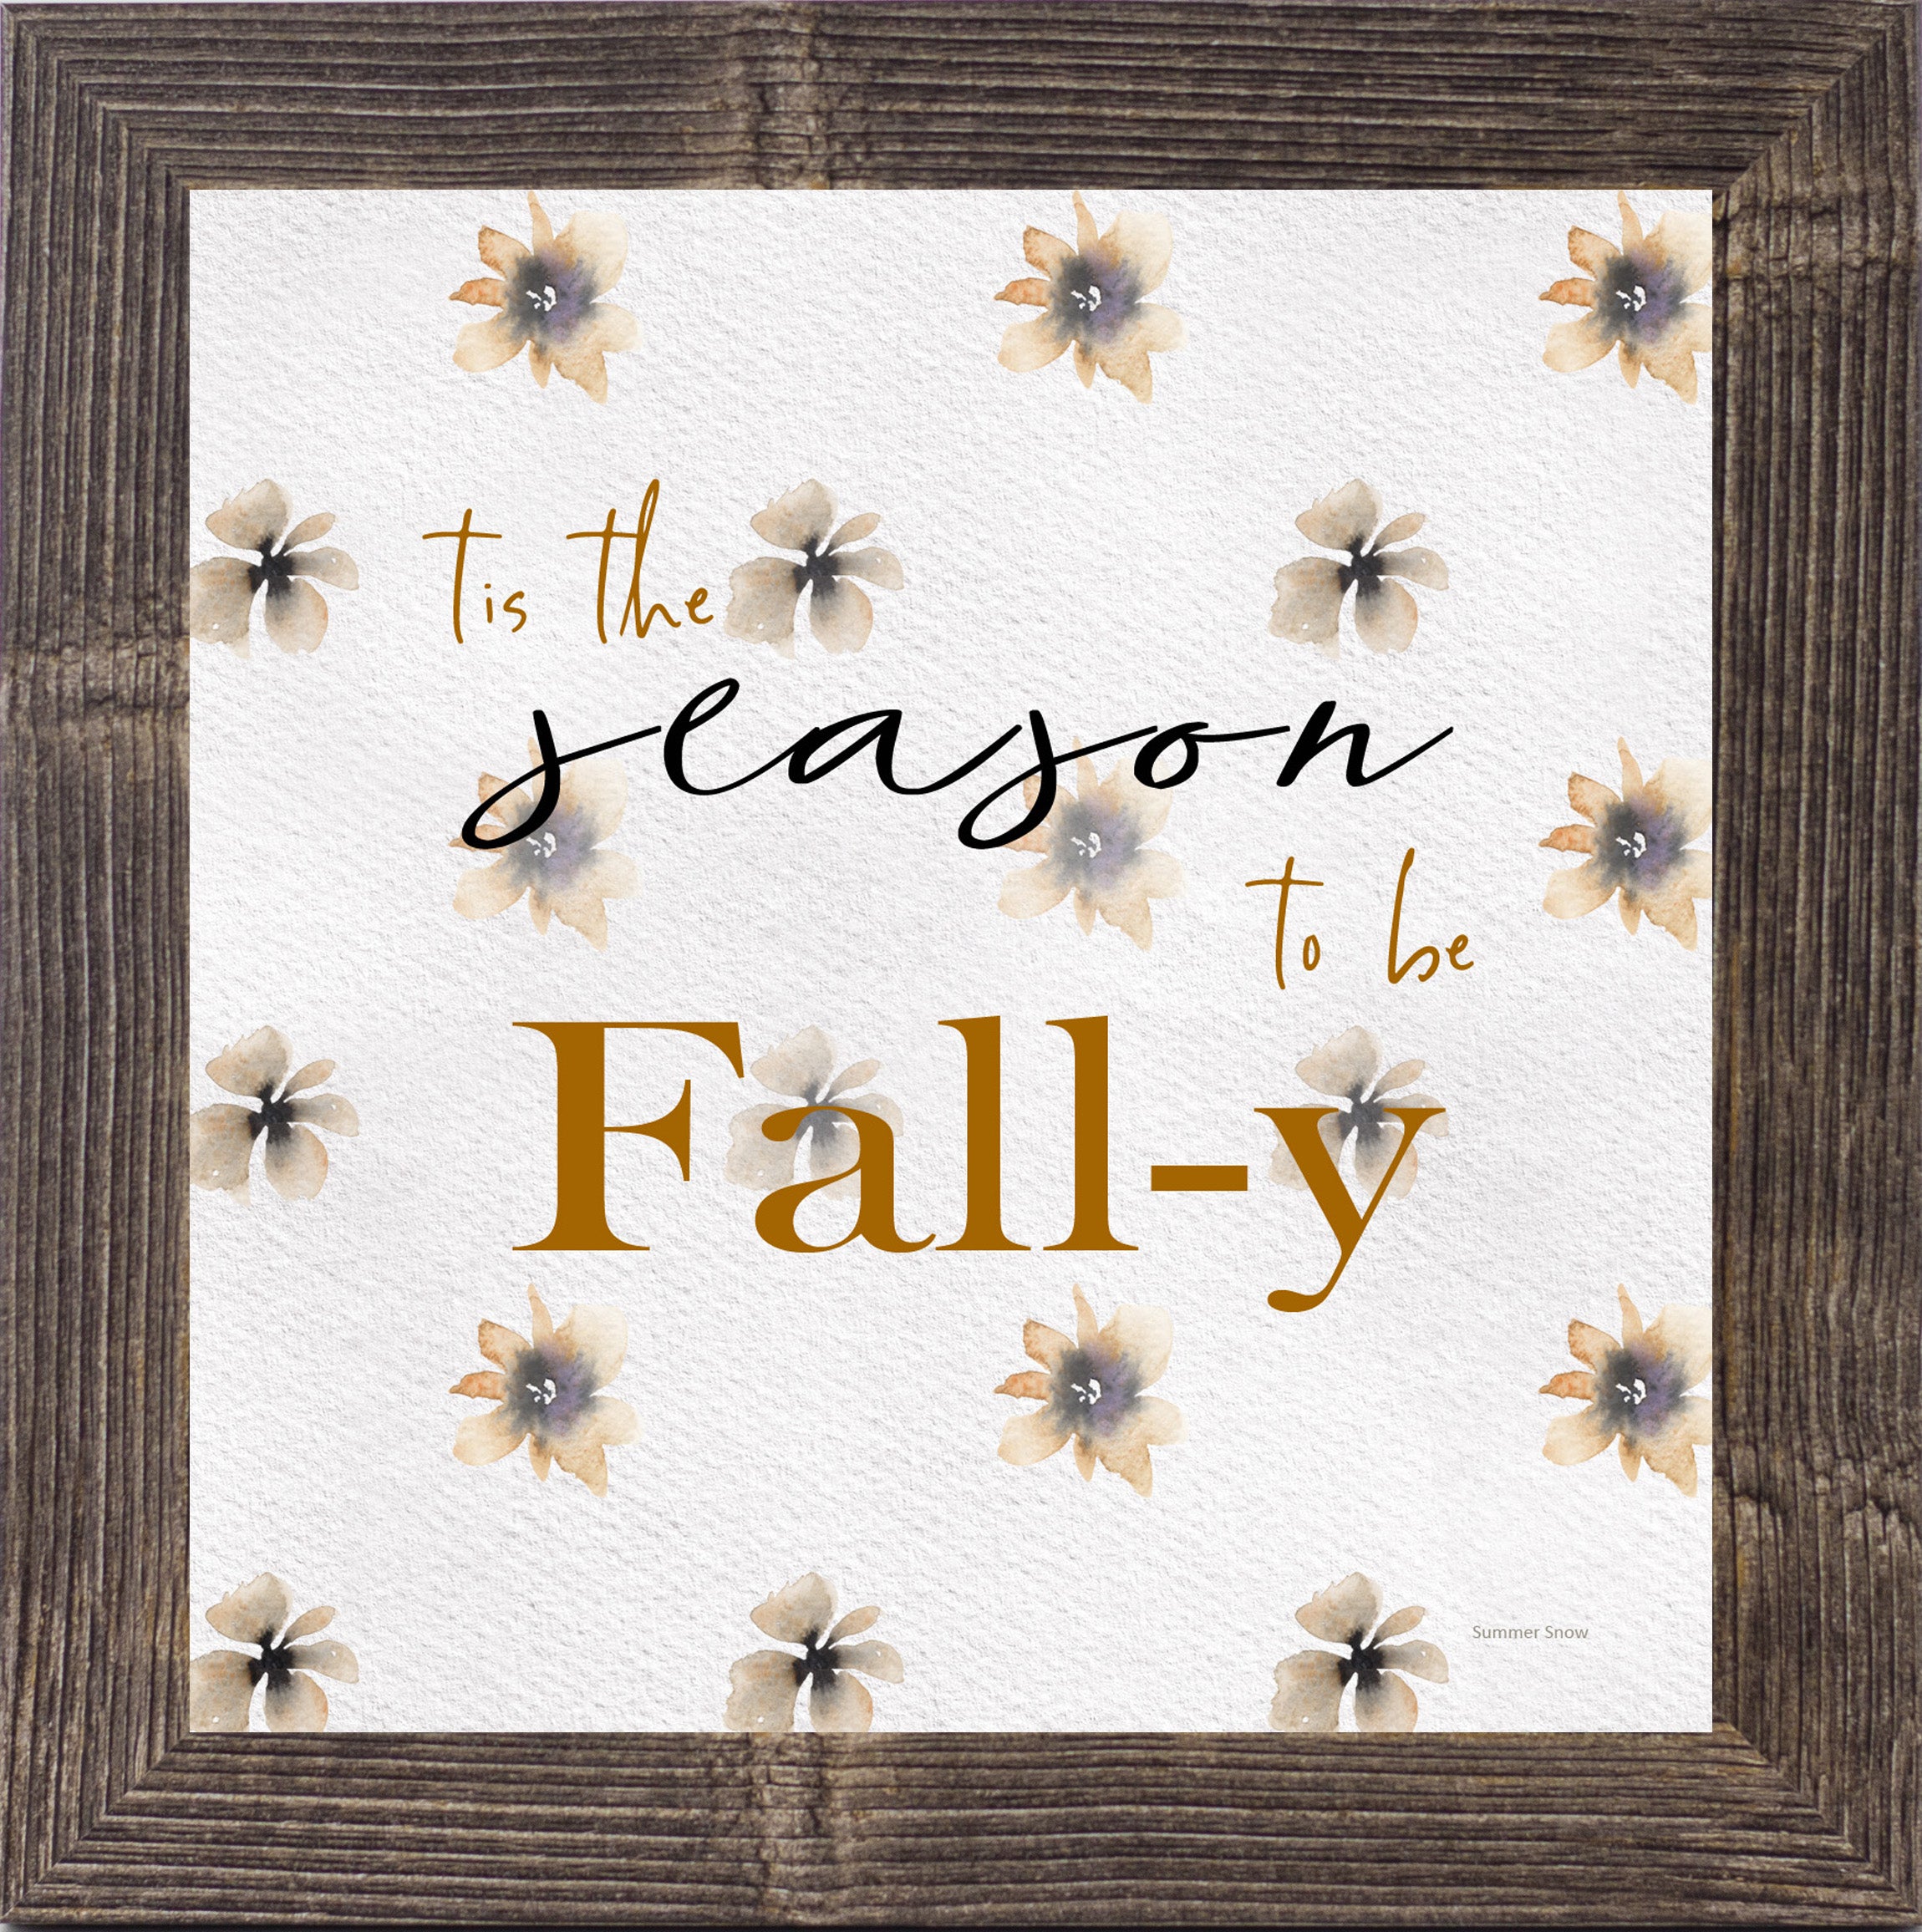 Tis the Season to Be Fall-y by Summer Snow SN34